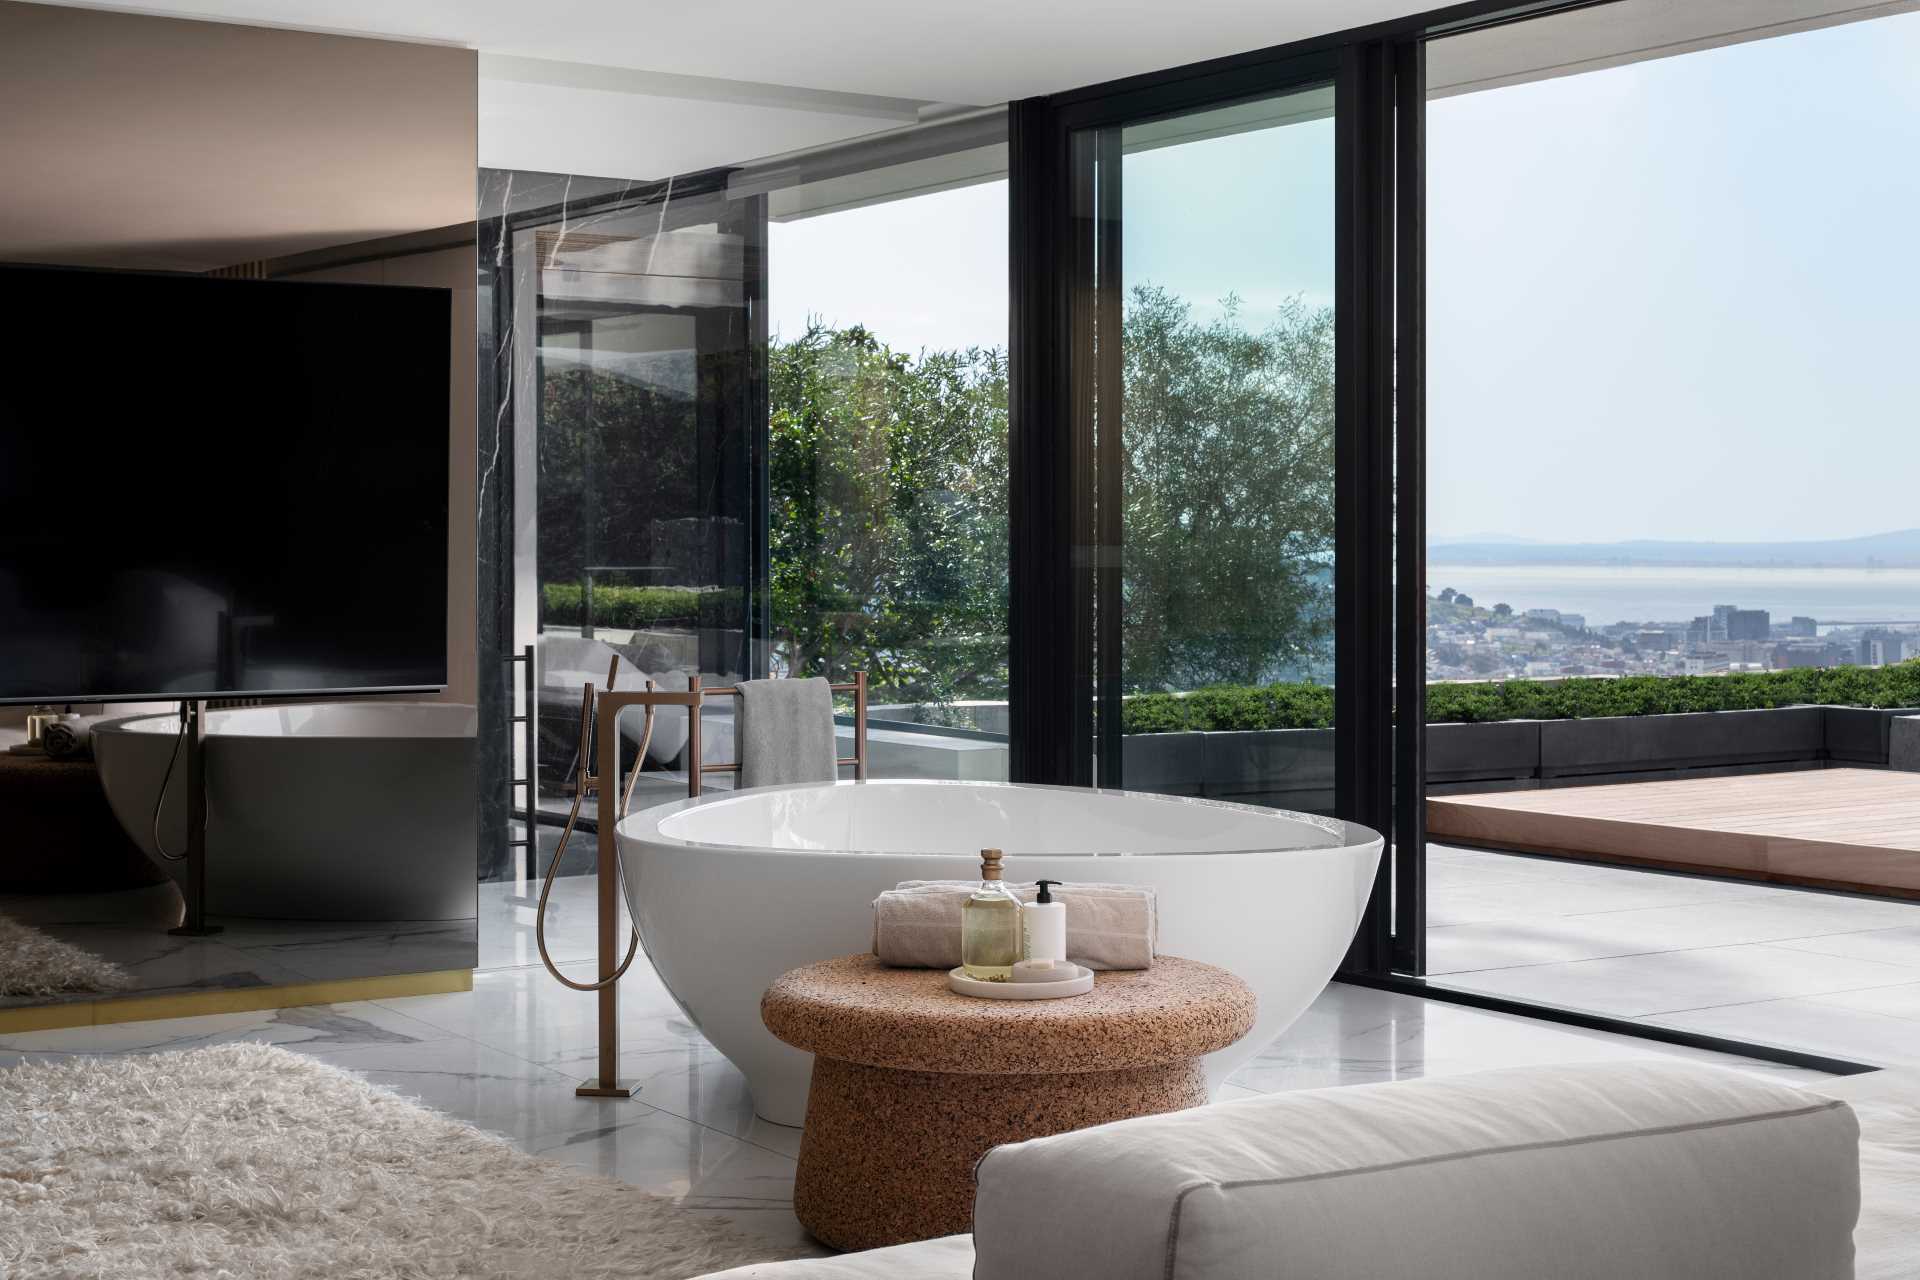 The main suite bathroom has a double vanity, a lounge area, and a freestanding bathtub with views of the city.